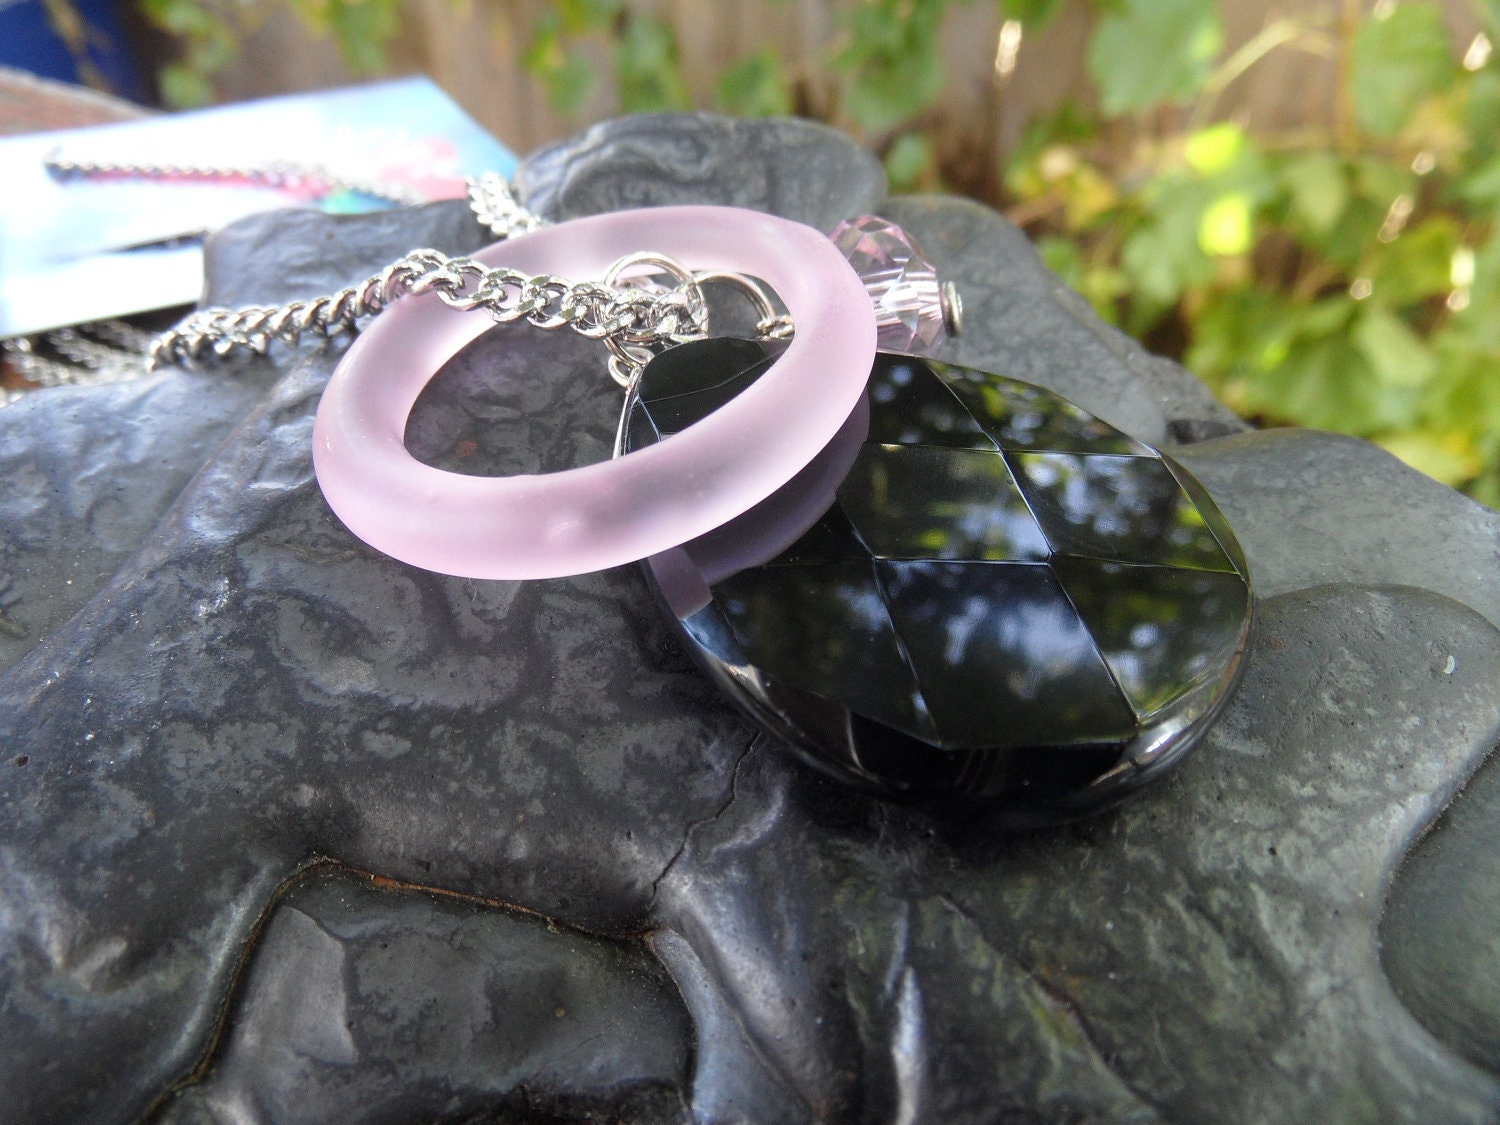 Pretty in Pink Glass, Onyx and Crystal